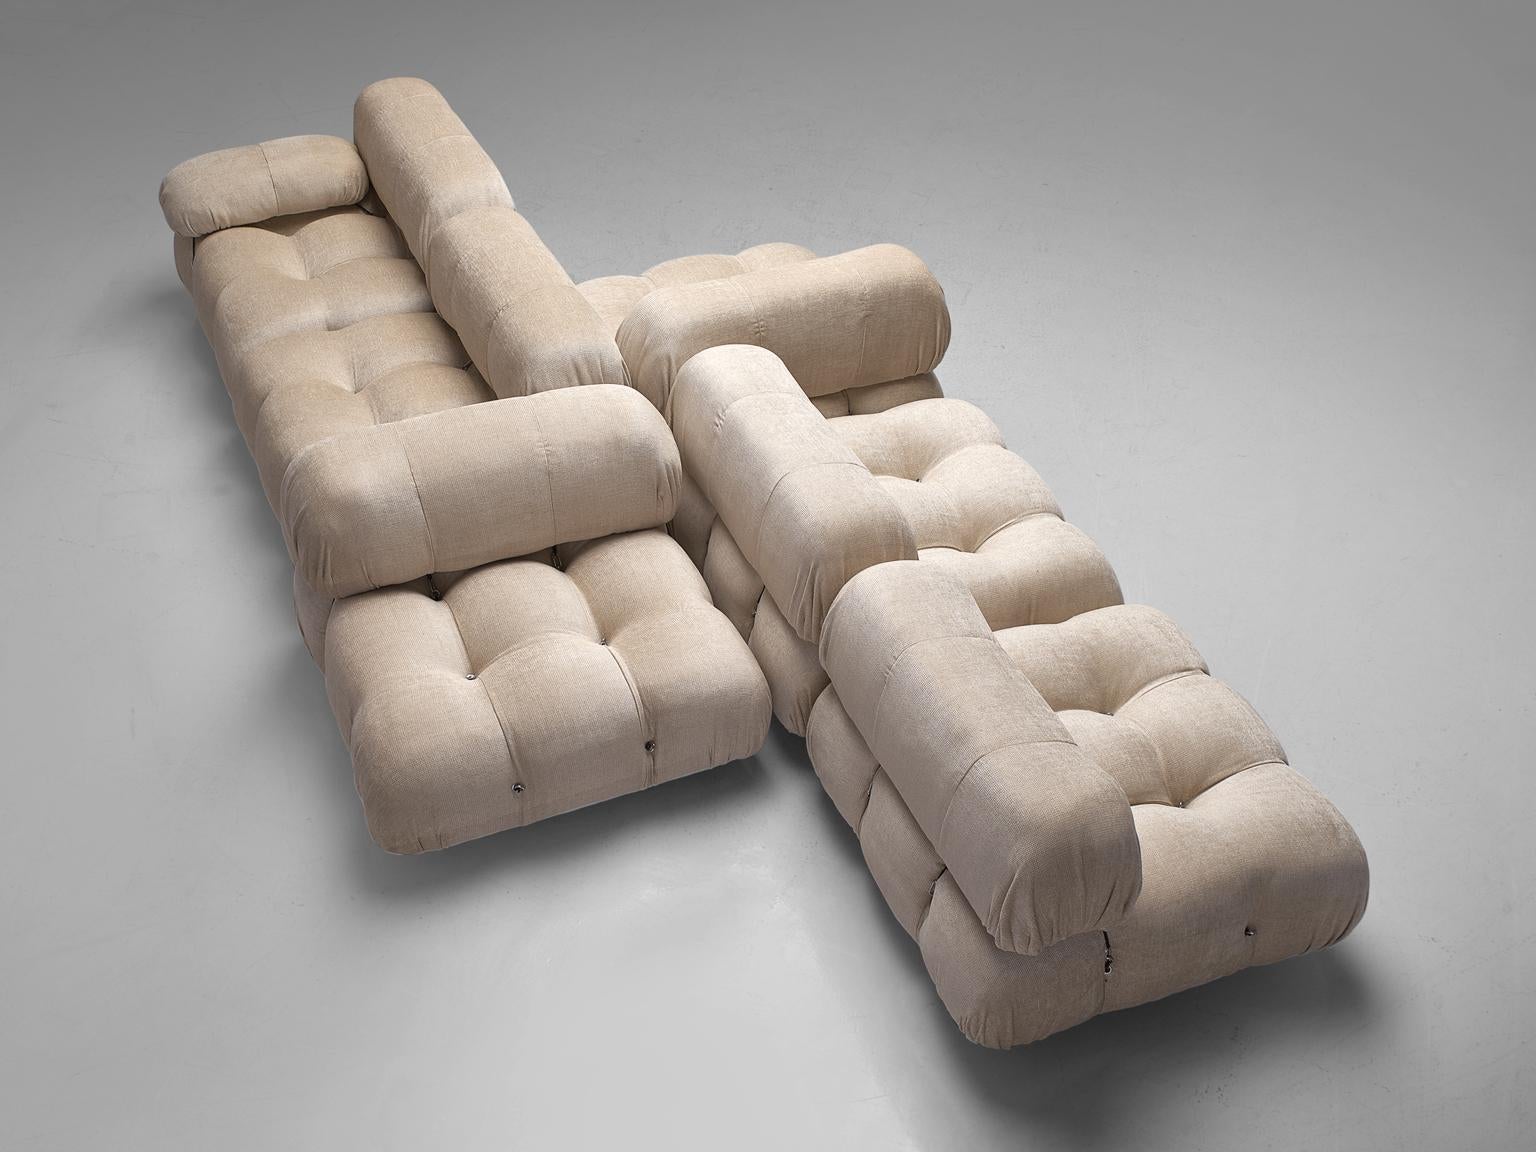 Mario Bellini, large modular reupholstered 'Cameleonda' sofa, Italy 1972.

Reupholstered Camaleonda sofa by Mario Bellini. This six elements modular sofa is a great example of the almost endless possibilities our team has to offer, and how we can